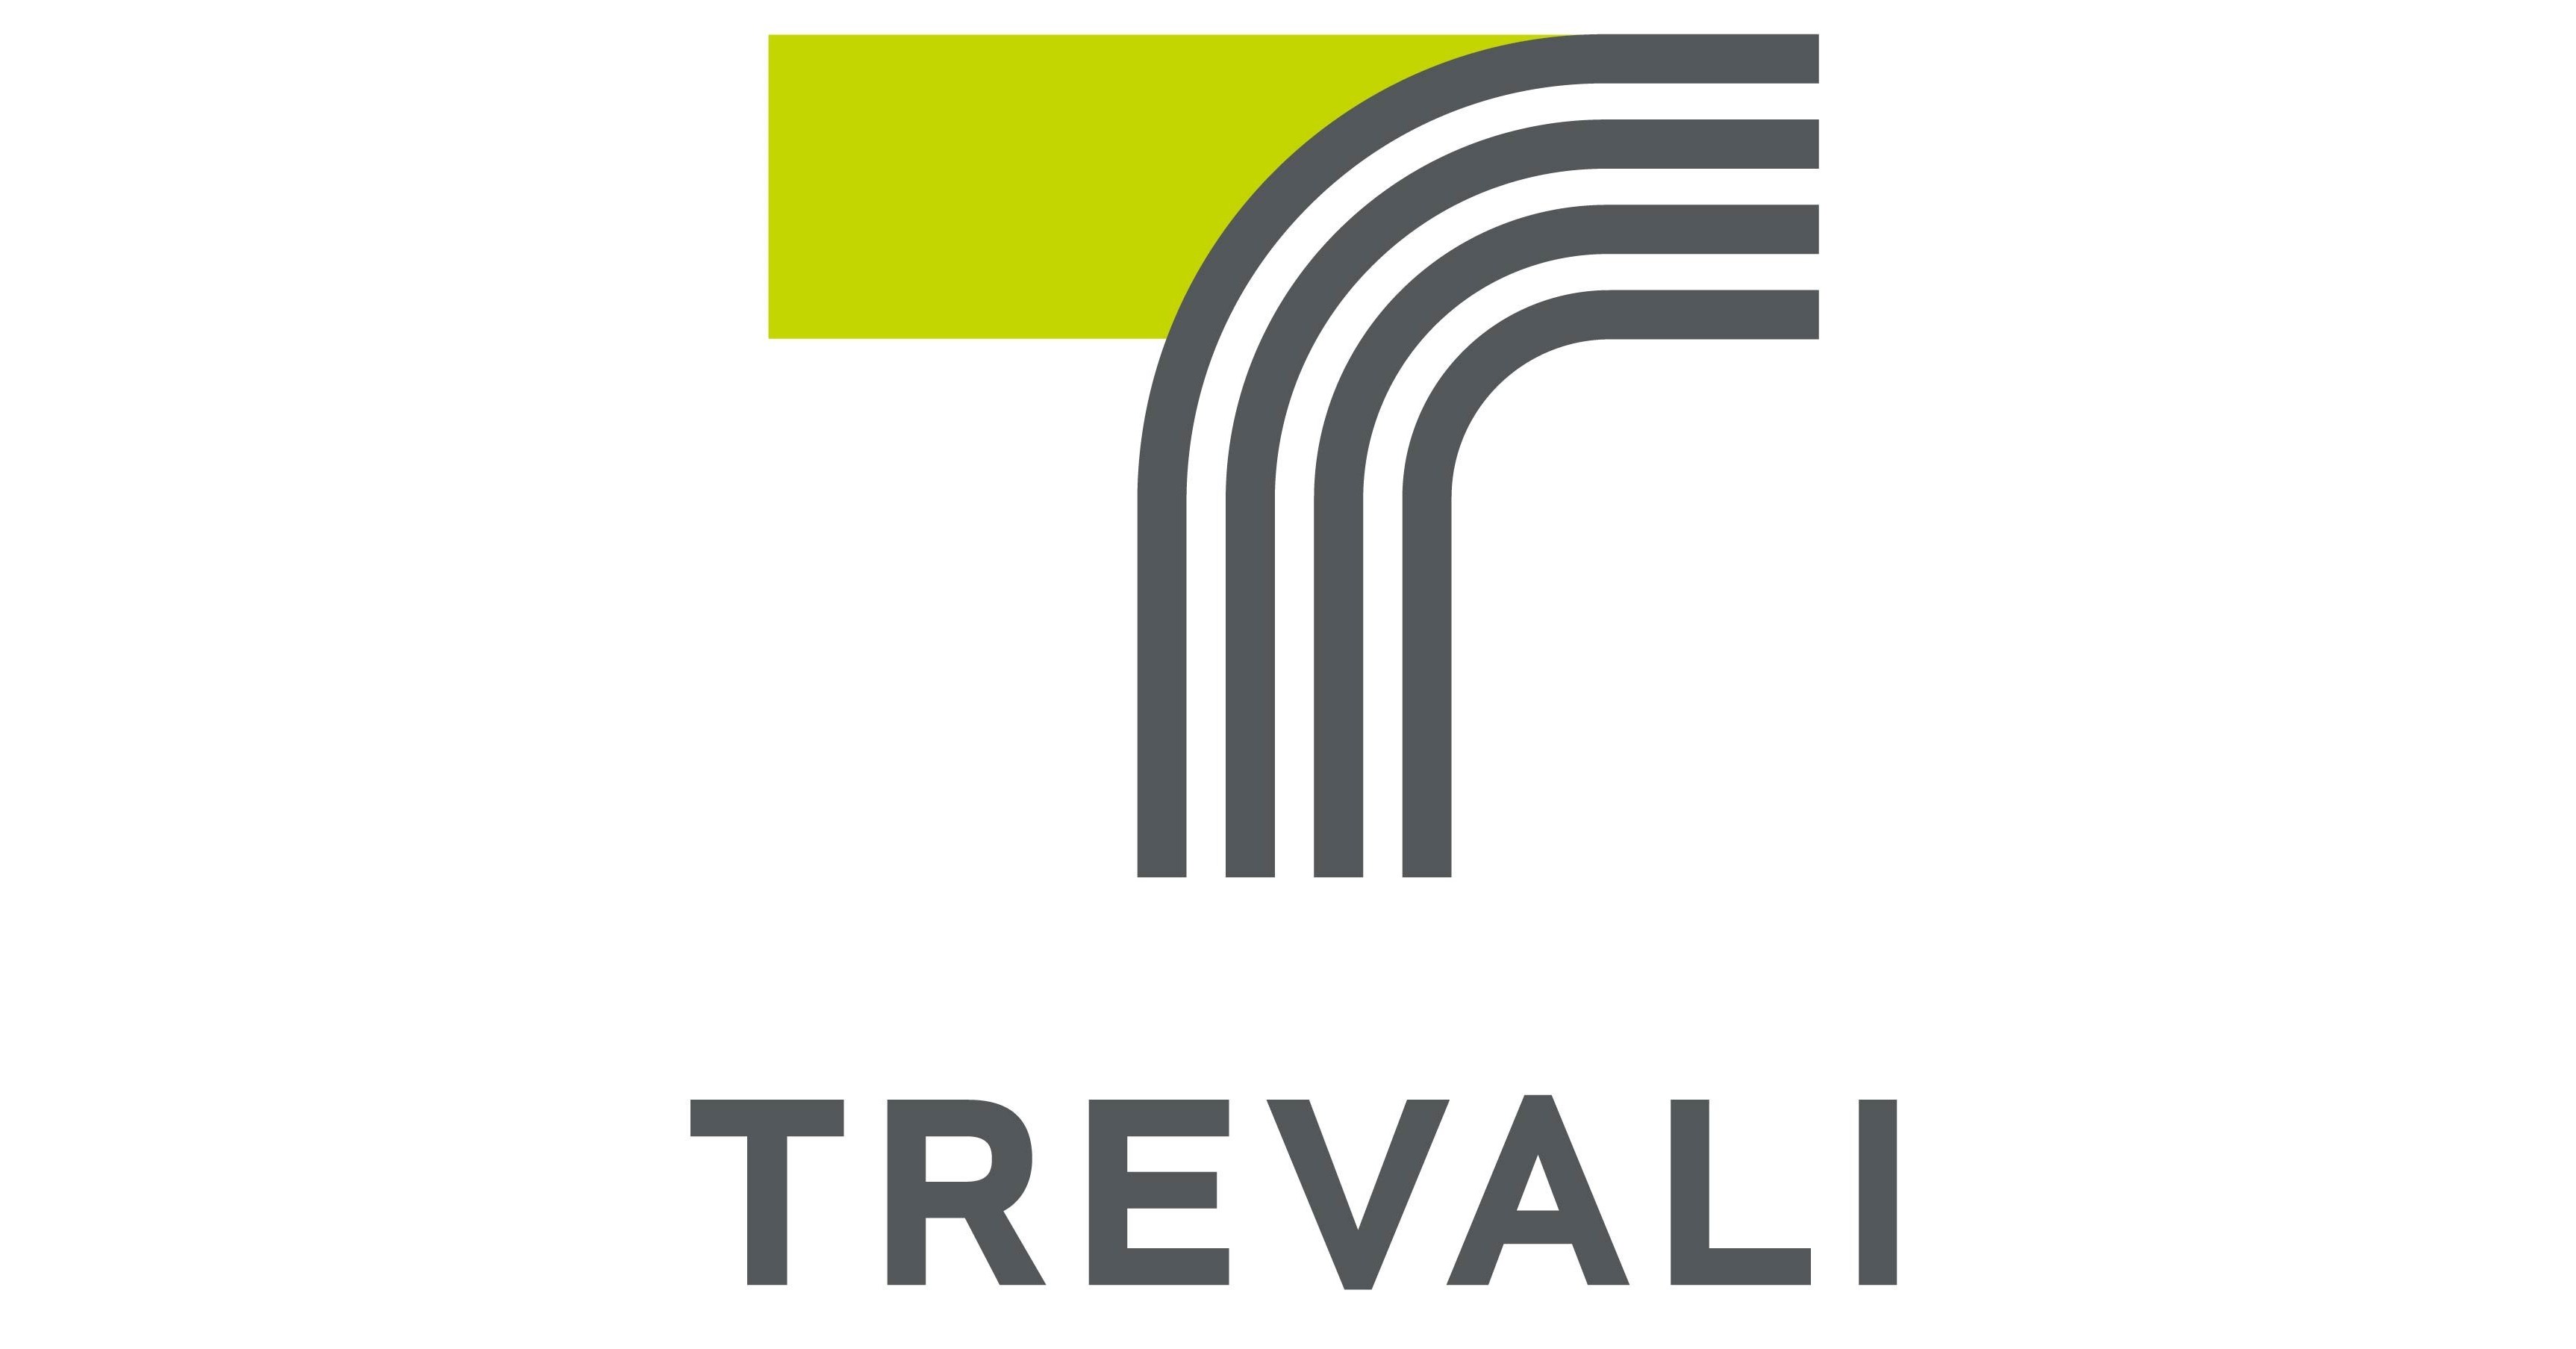 Trevali Mining Corporation Trevali Announces Appointment of Chie jpg?p=facebook.